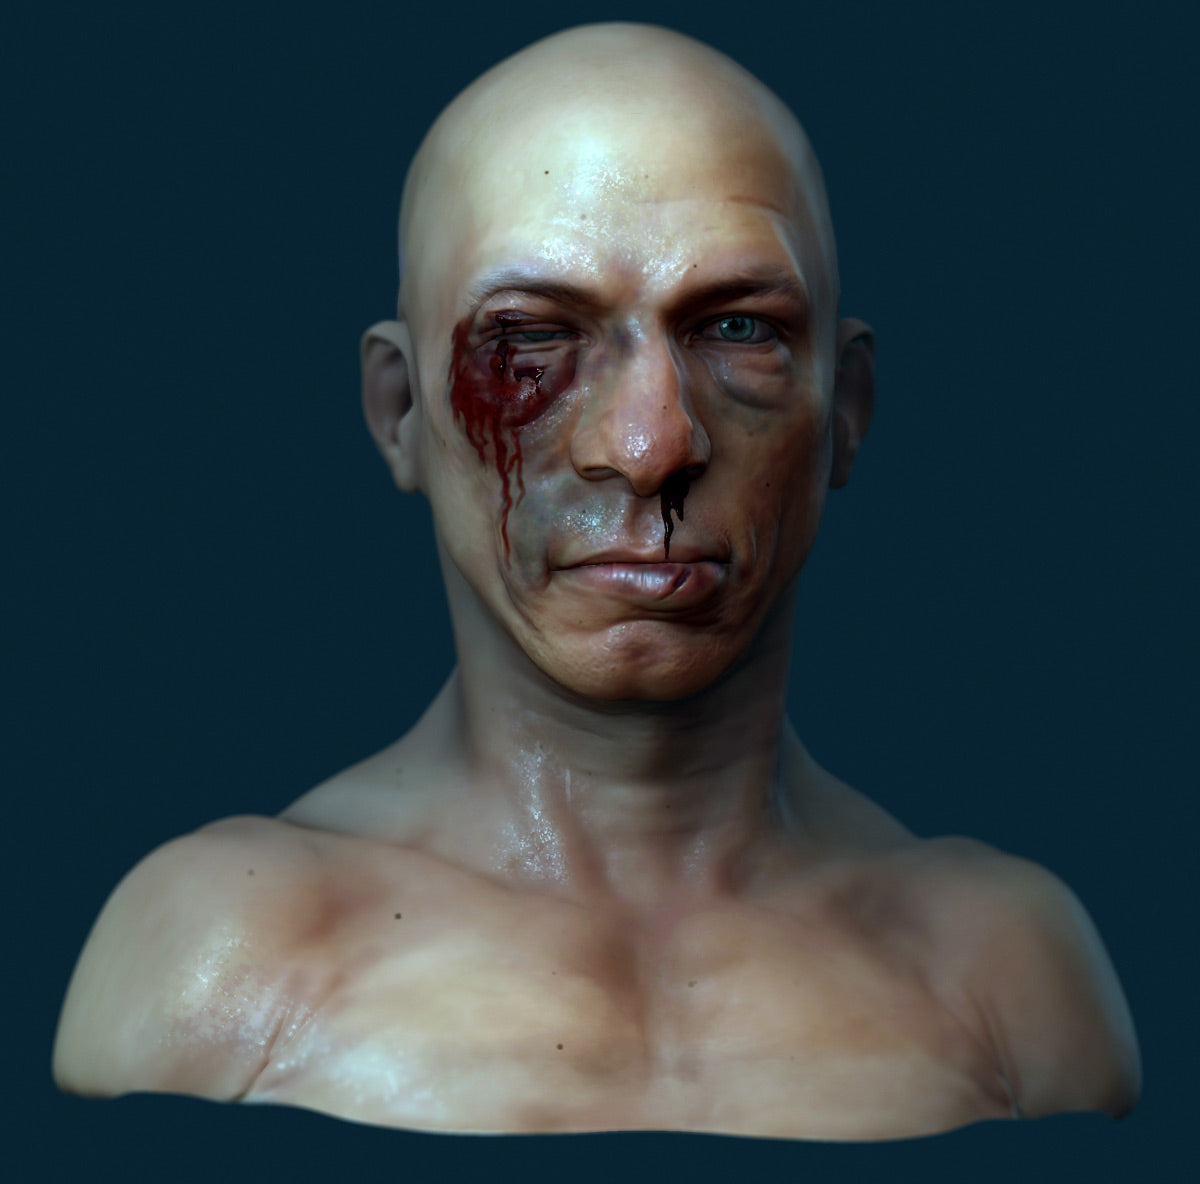 ZBrush Character Creation (Download Only)